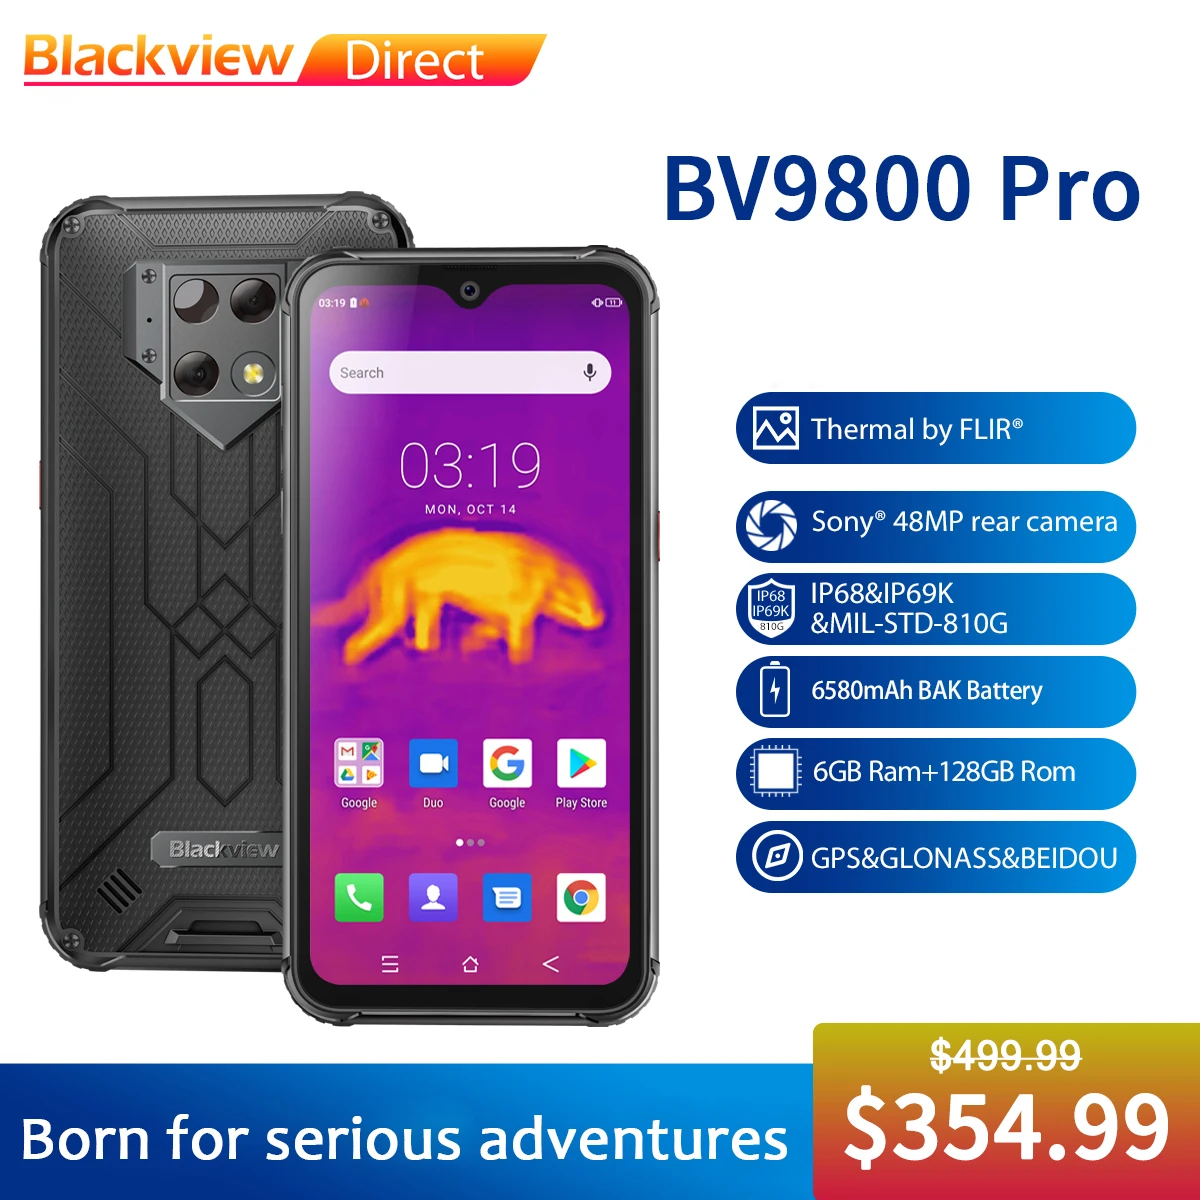 

Blackview BV9800 Pro Global First Thermal imaging Smartphone Helio P70 Android 9.0 6GB+128GB Waterproof 6580mAh Mobile Phone